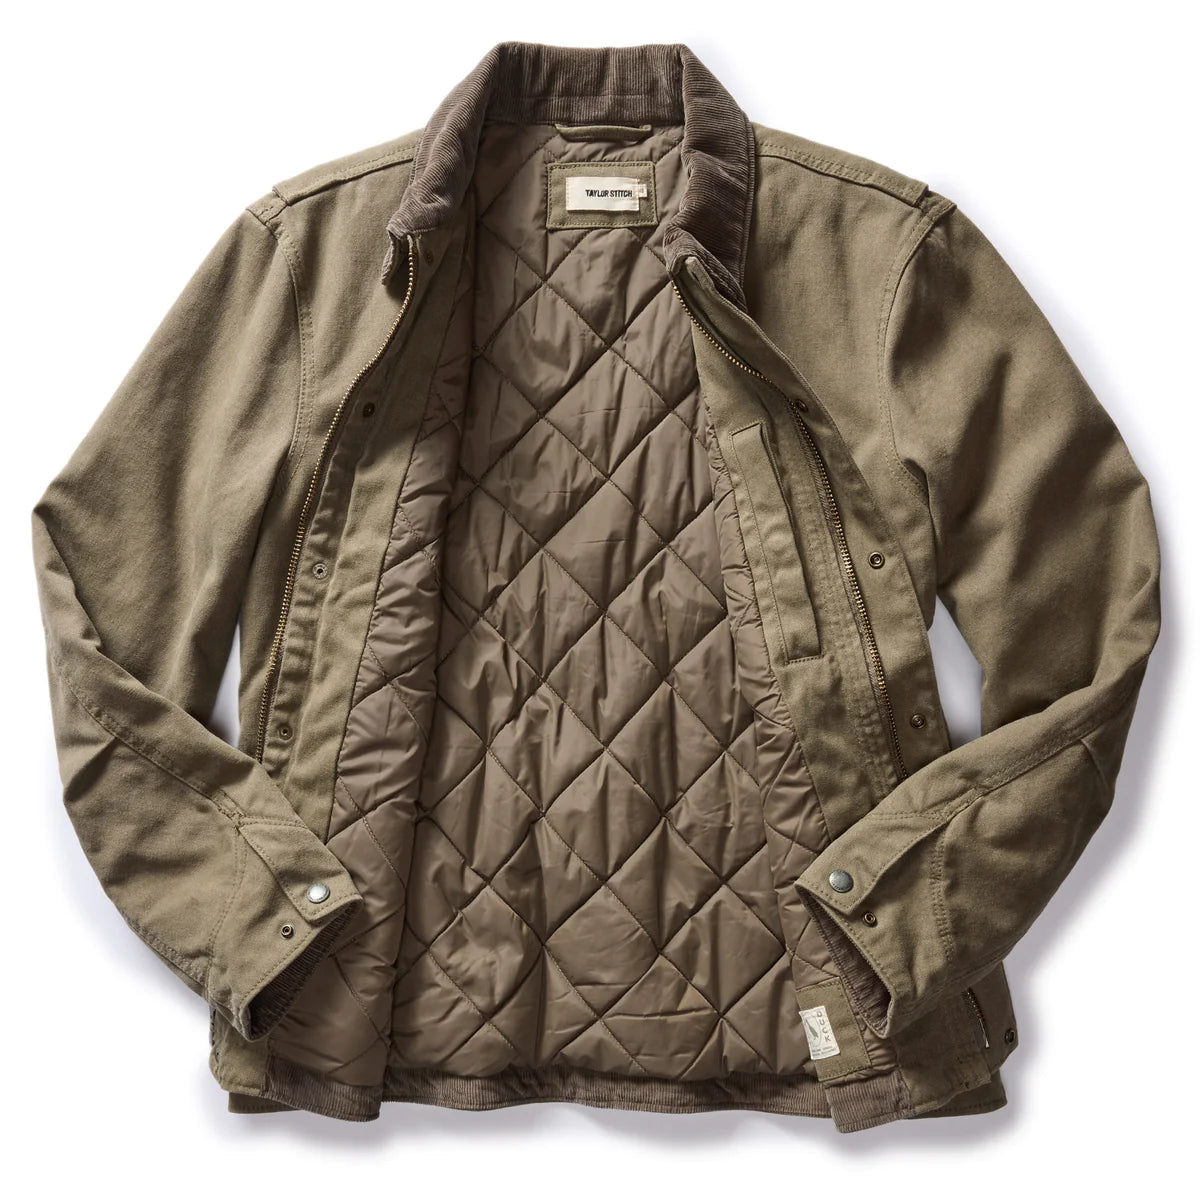 Taylor Stitch - The Workhorse Jacket in Stone Boss Duck